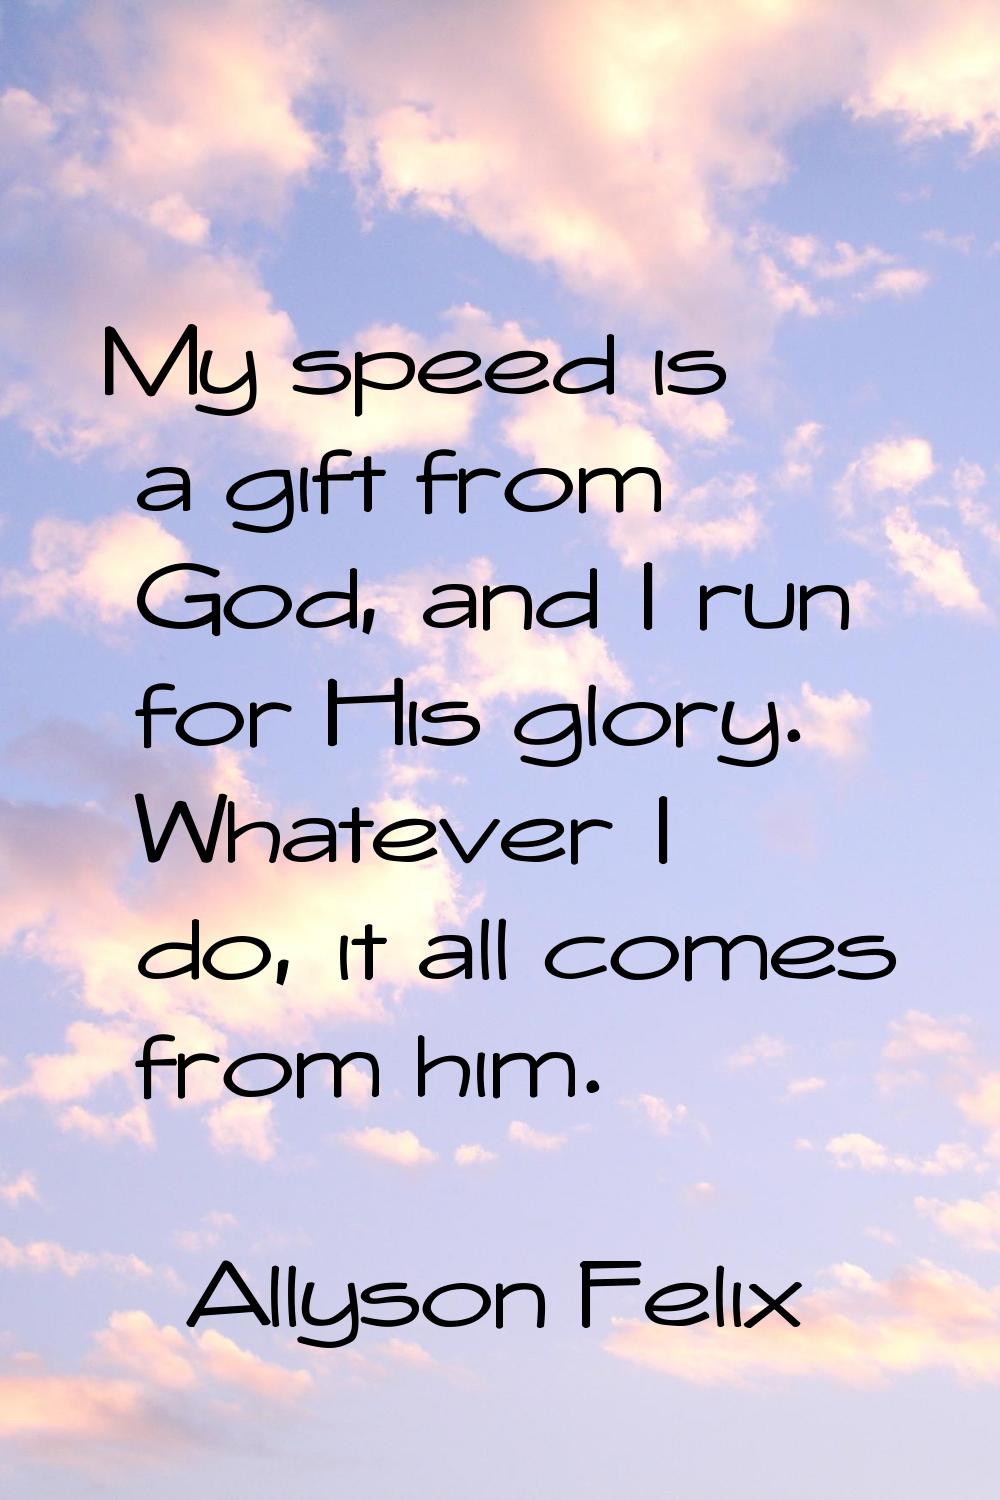 My speed is a gift from God, and I run for His glory. Whatever I do, it all comes from him.